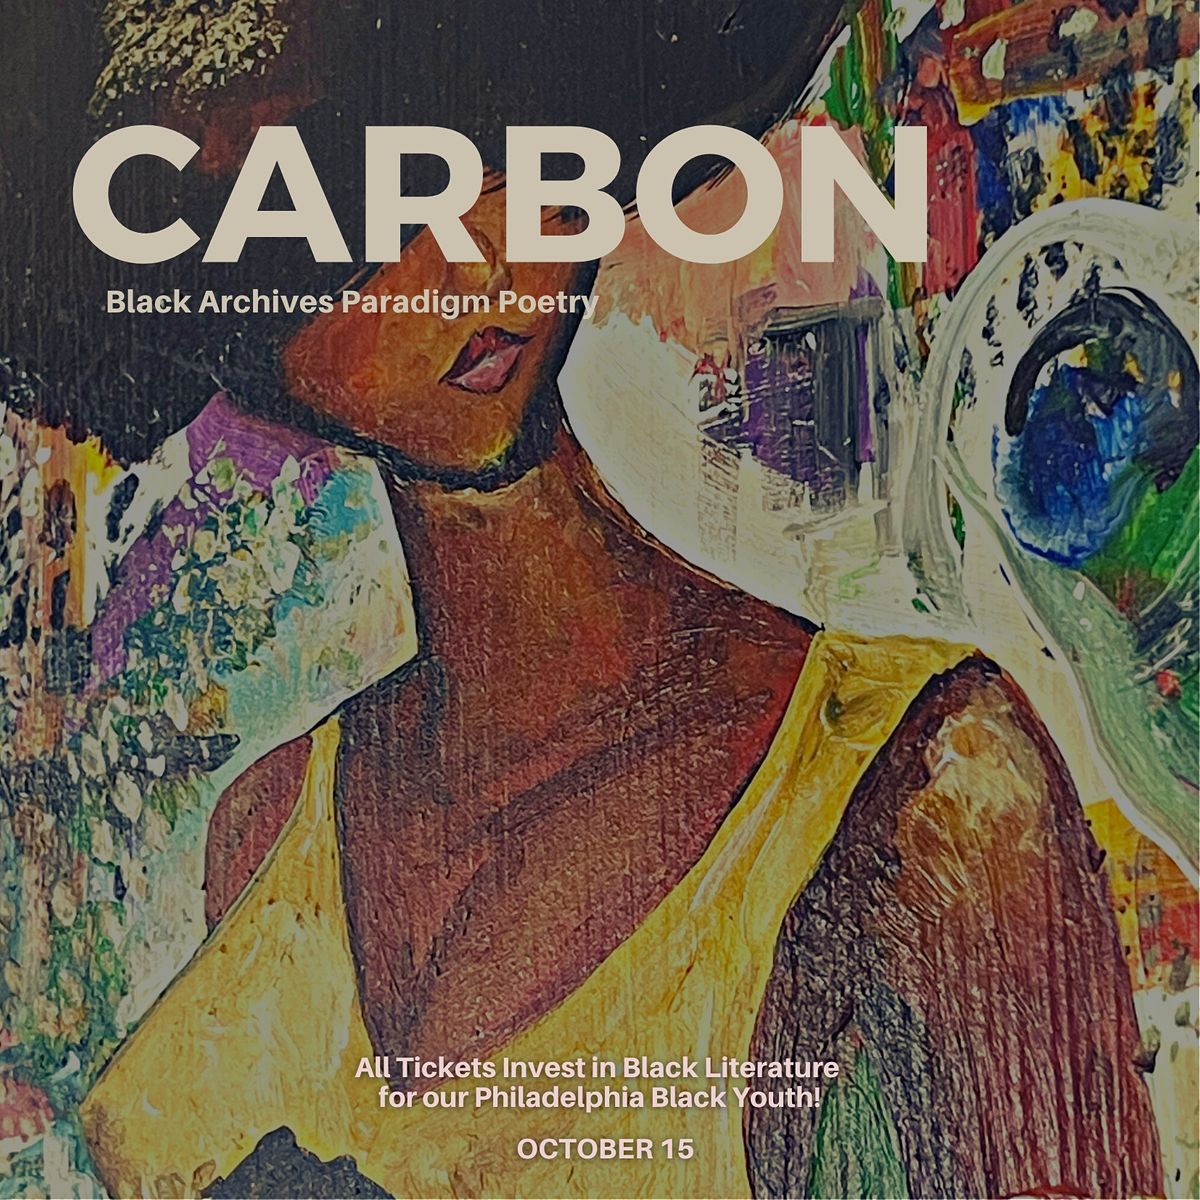 Carbon: The Black Archives Poetry Paradigm